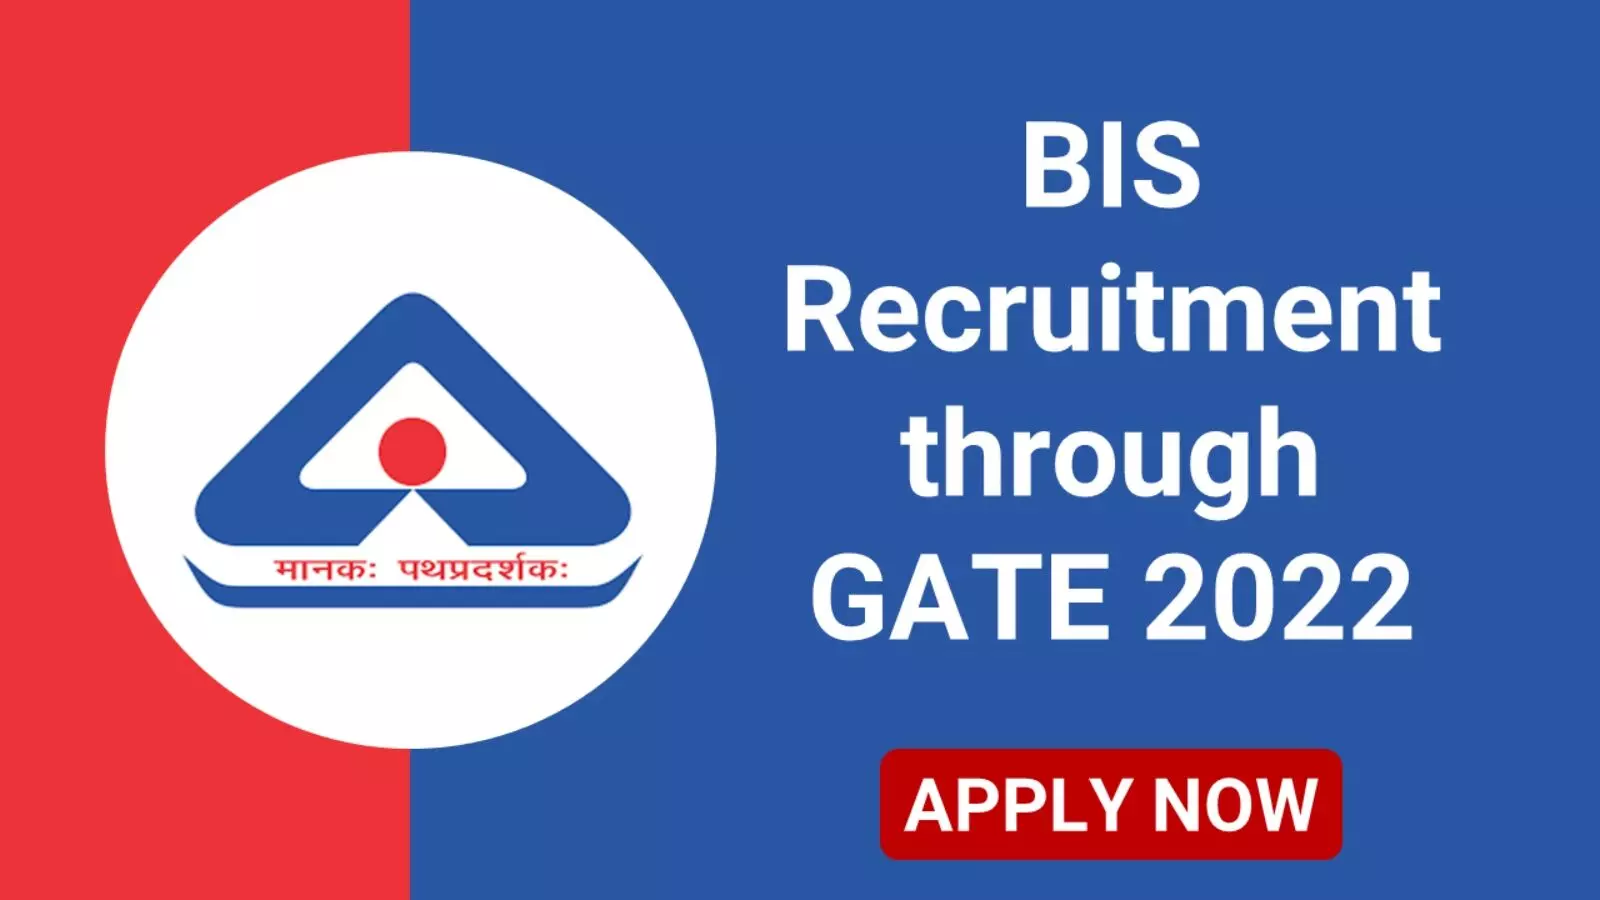 bis recruitment 2022 vacancy know selection process education